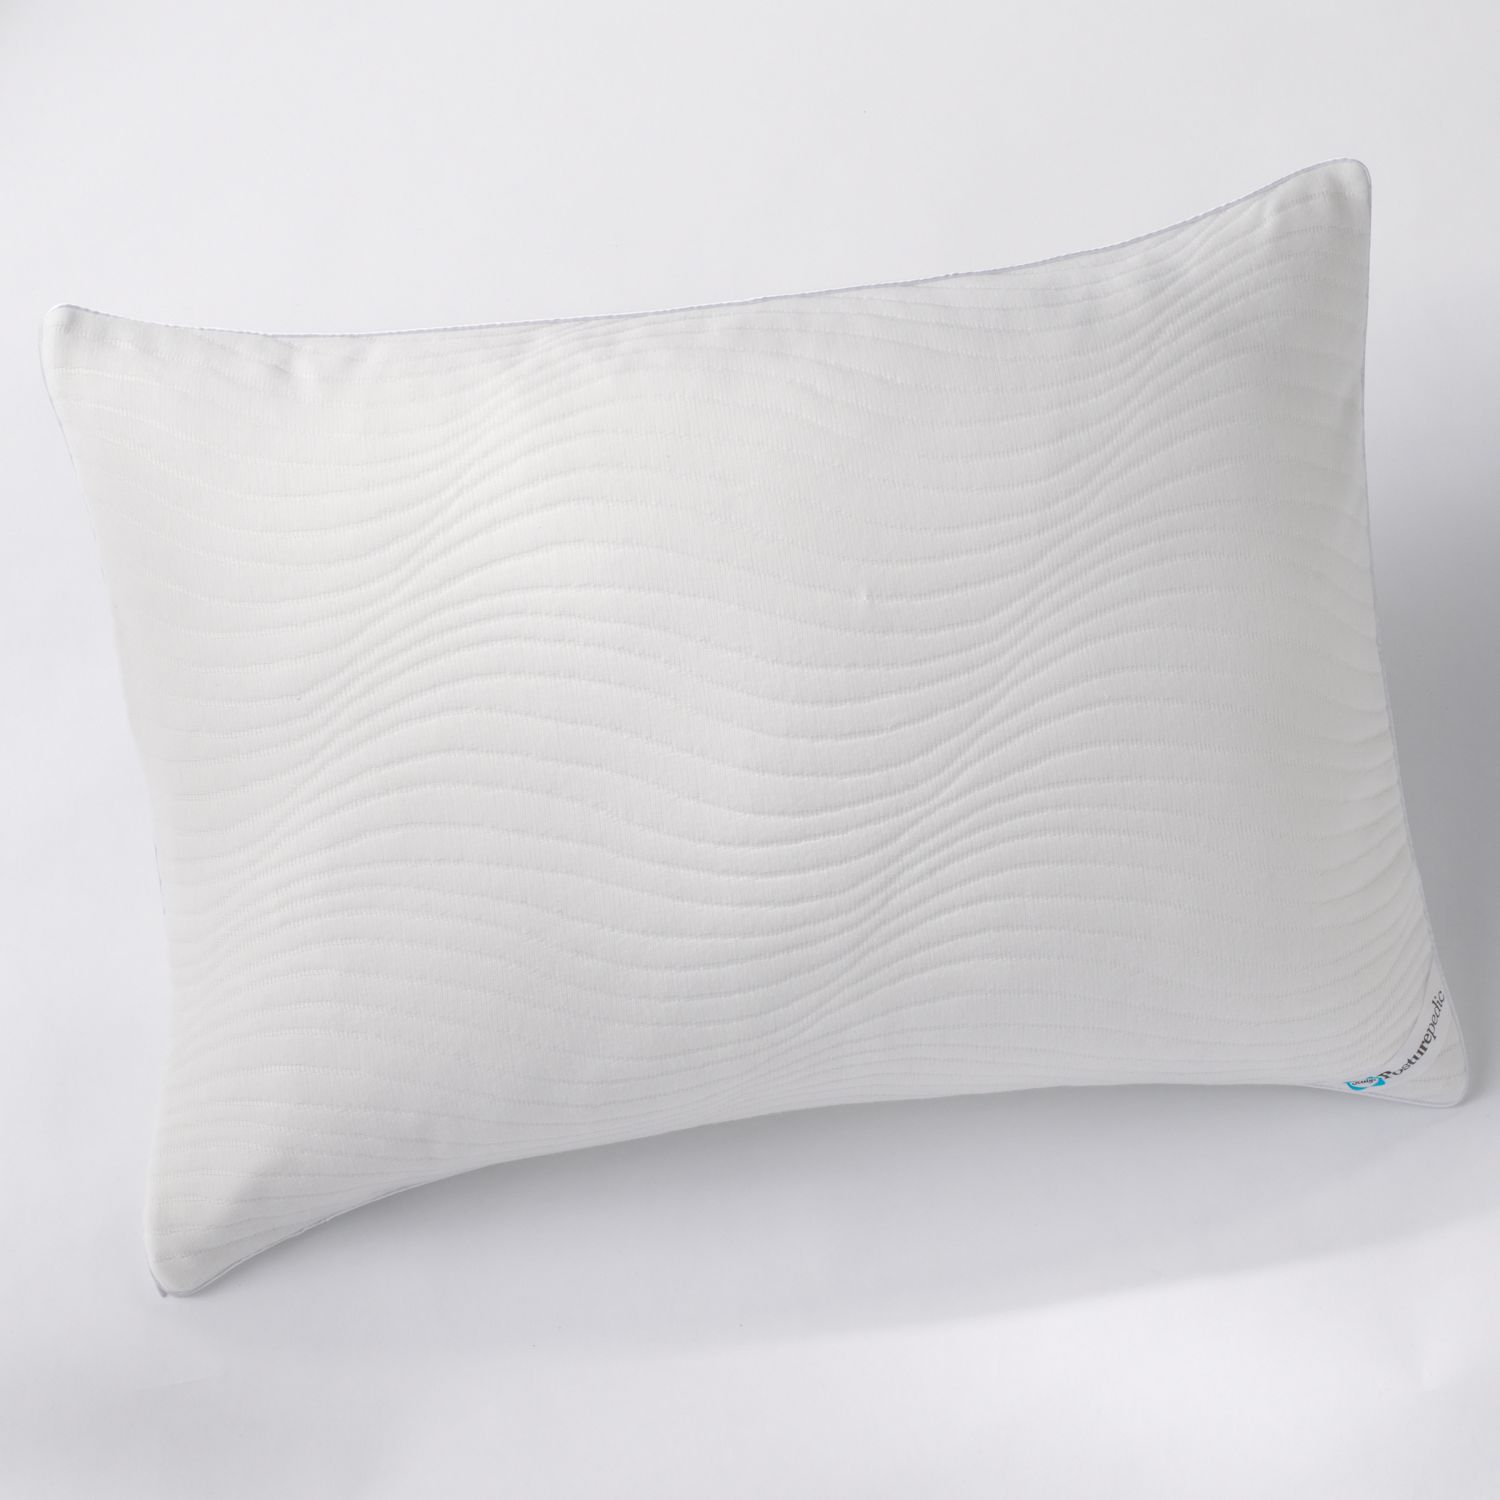 sealy performance frost cool 2.0 pillows